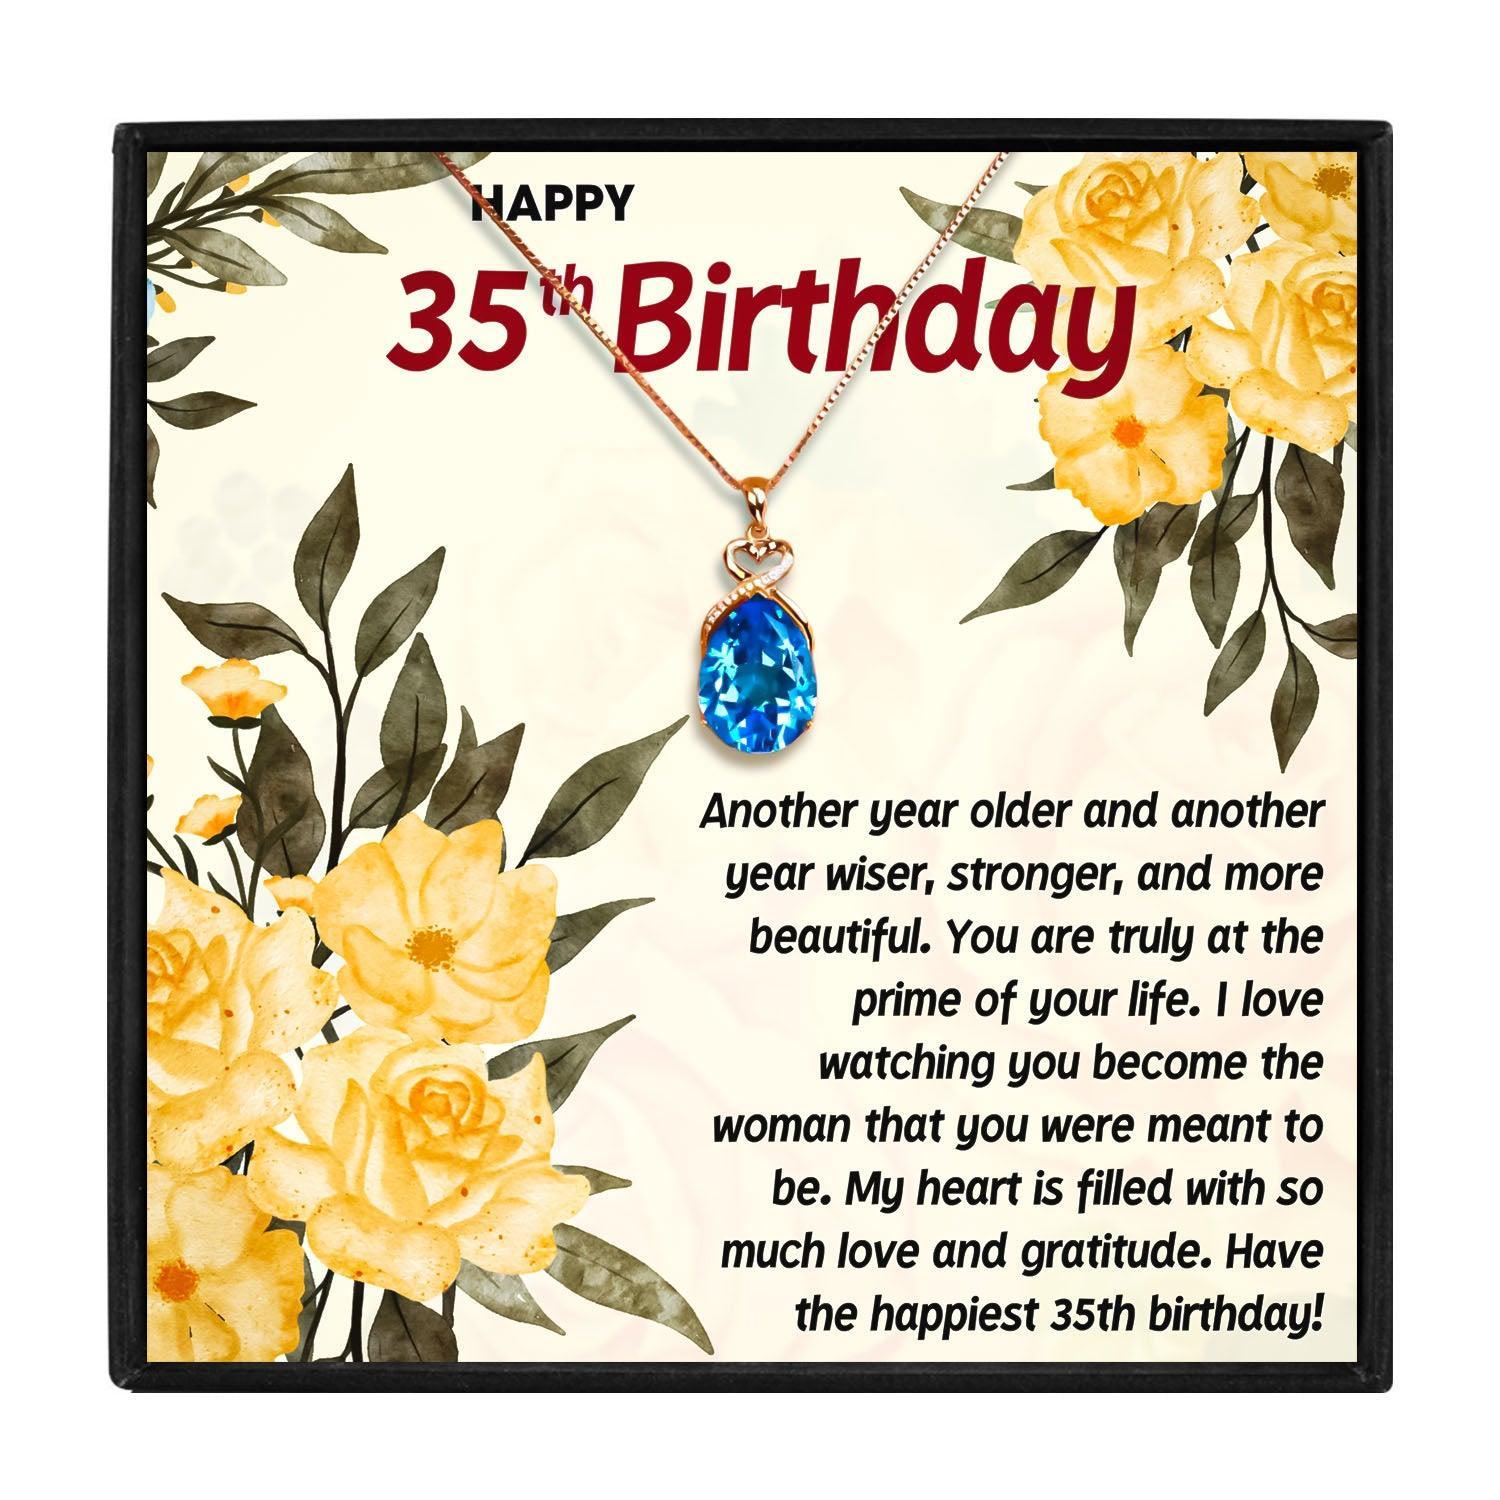 Gift Ideas for a Wife's 35th Birthday for Christmas 2023 | Gift Ideas for a Wife's 35th Birthday - undefined | 35 birthday gift, 35th birthday ideas for a woman, 35th birthday ideas for her, 35th birthday ideas for wife | From Hunny Life | hunnylife.com